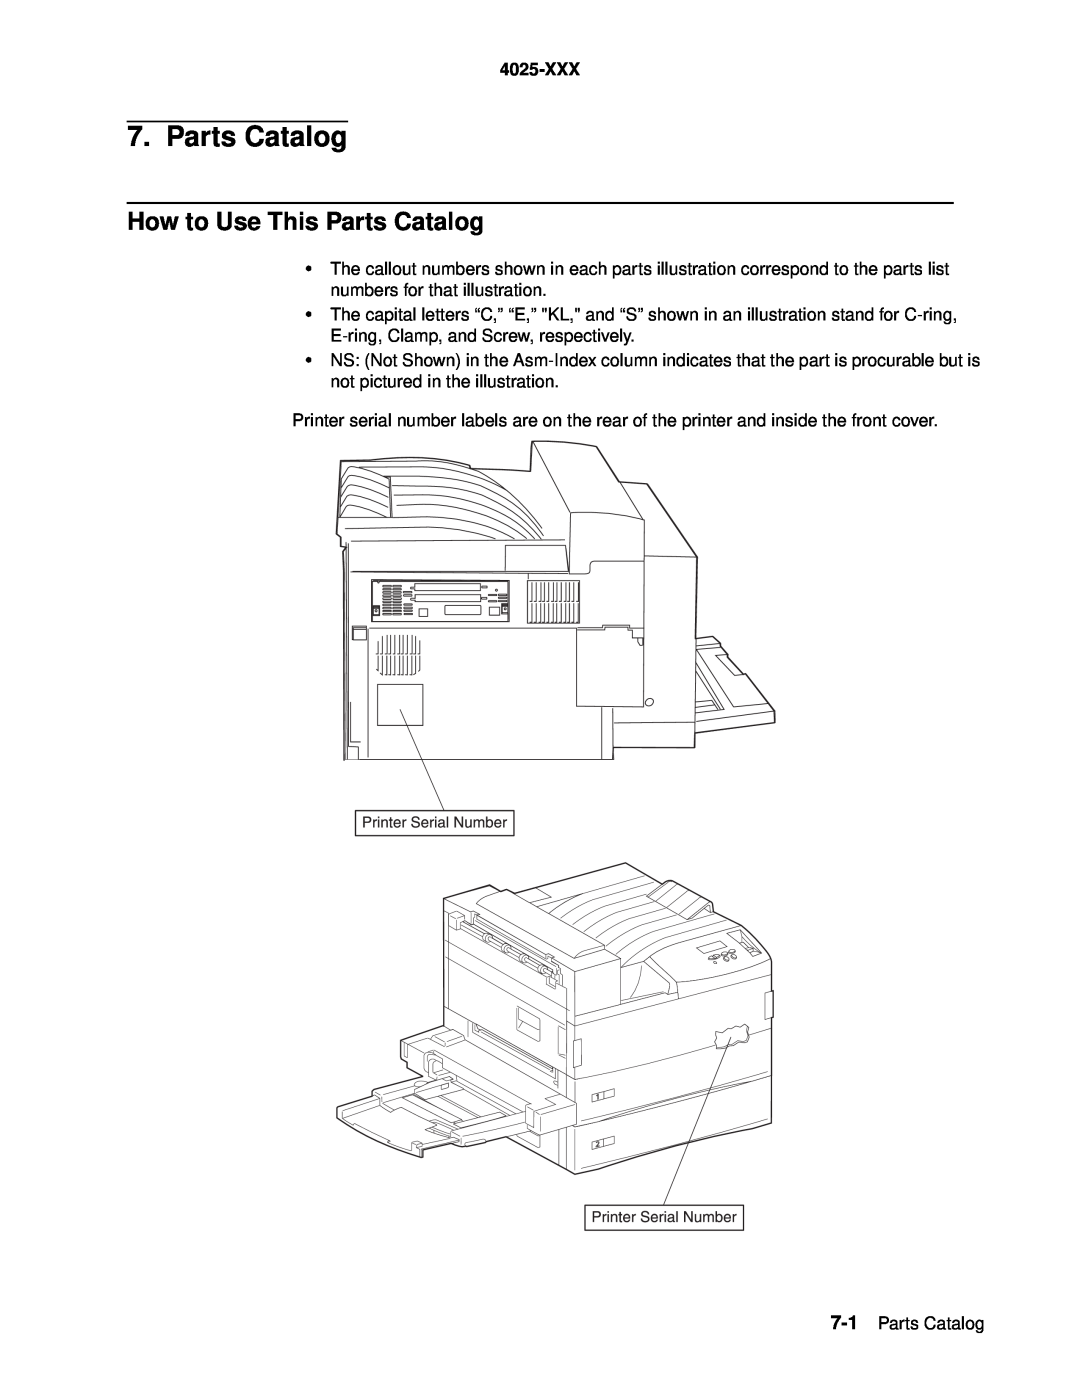 Lexmark W820 service manual How to Use This Parts Catalog, 4025-XXX 